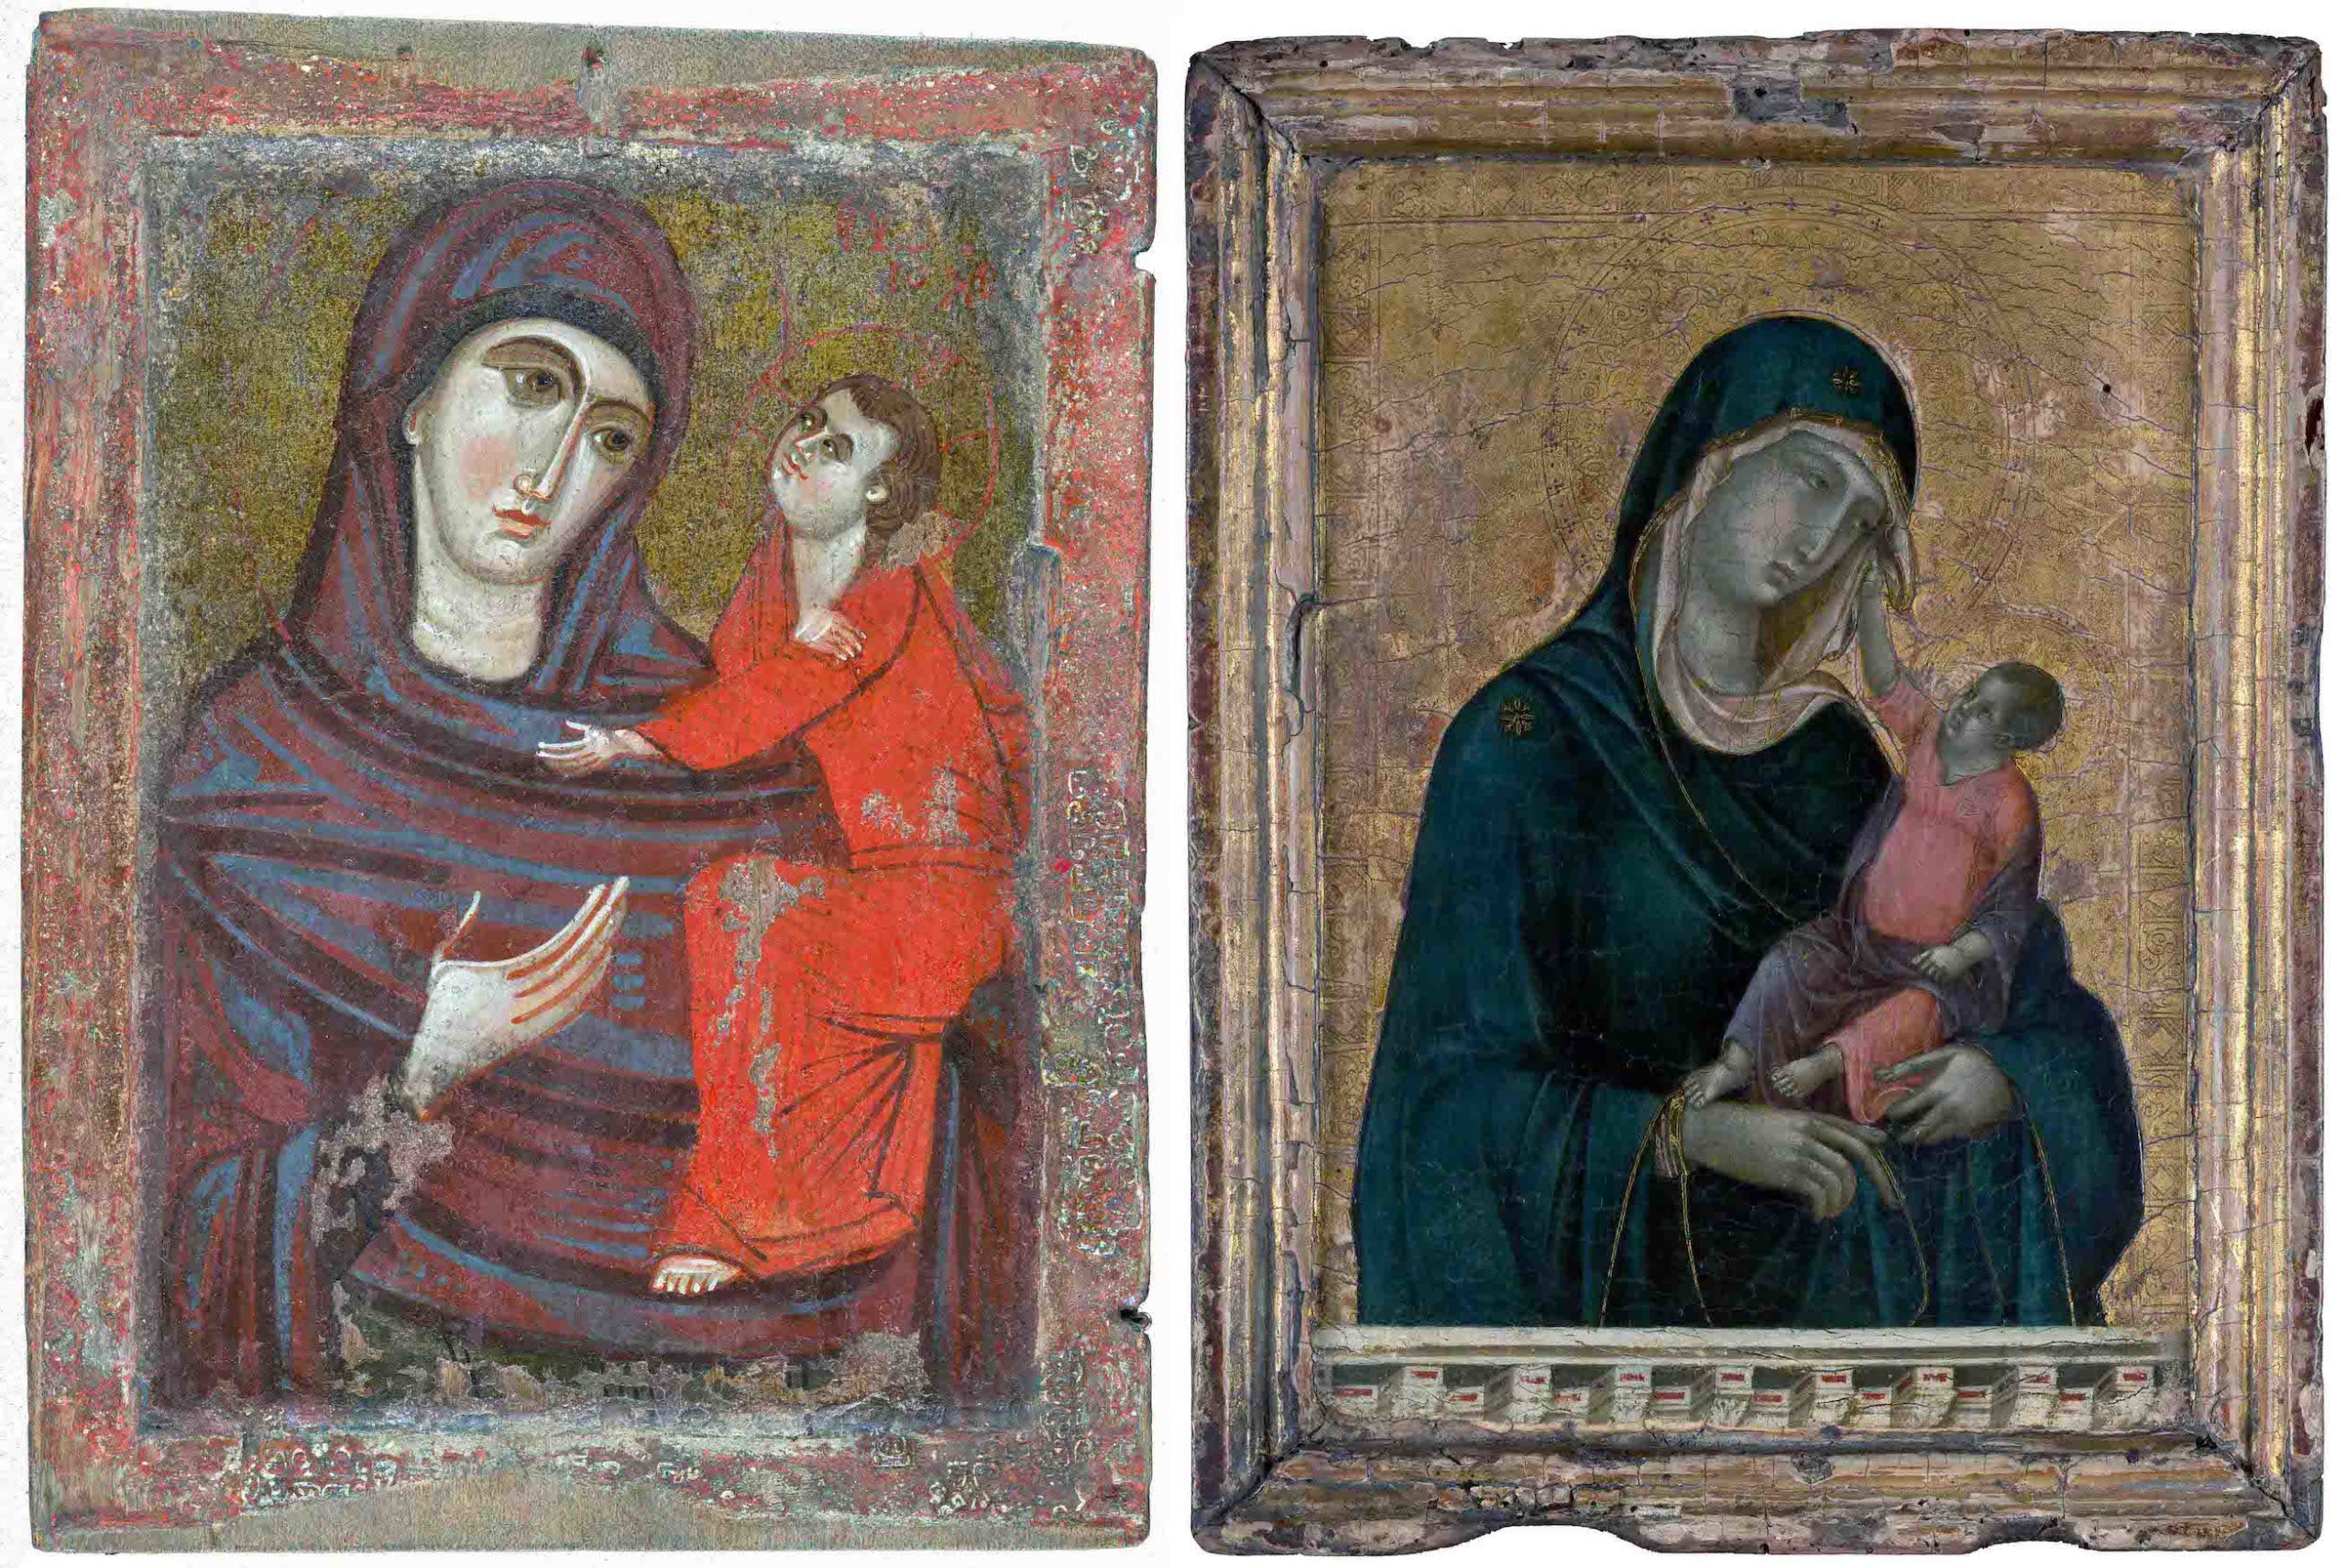 Left: Icon of the Virgin and Child, Hodegetria variant, 13th century, Byzantine or Crusader, made in Egypt, tempera on wood, 25.4 x 18.4 x 1.3 cm (The Metropolitan Museum of Art); right: Duccio di Buoninsegna, Madonna and Child, c. 1290–1300, tempera and gold on wood, 27.9 x 21 cm (The Metropolitan Museum of Art)